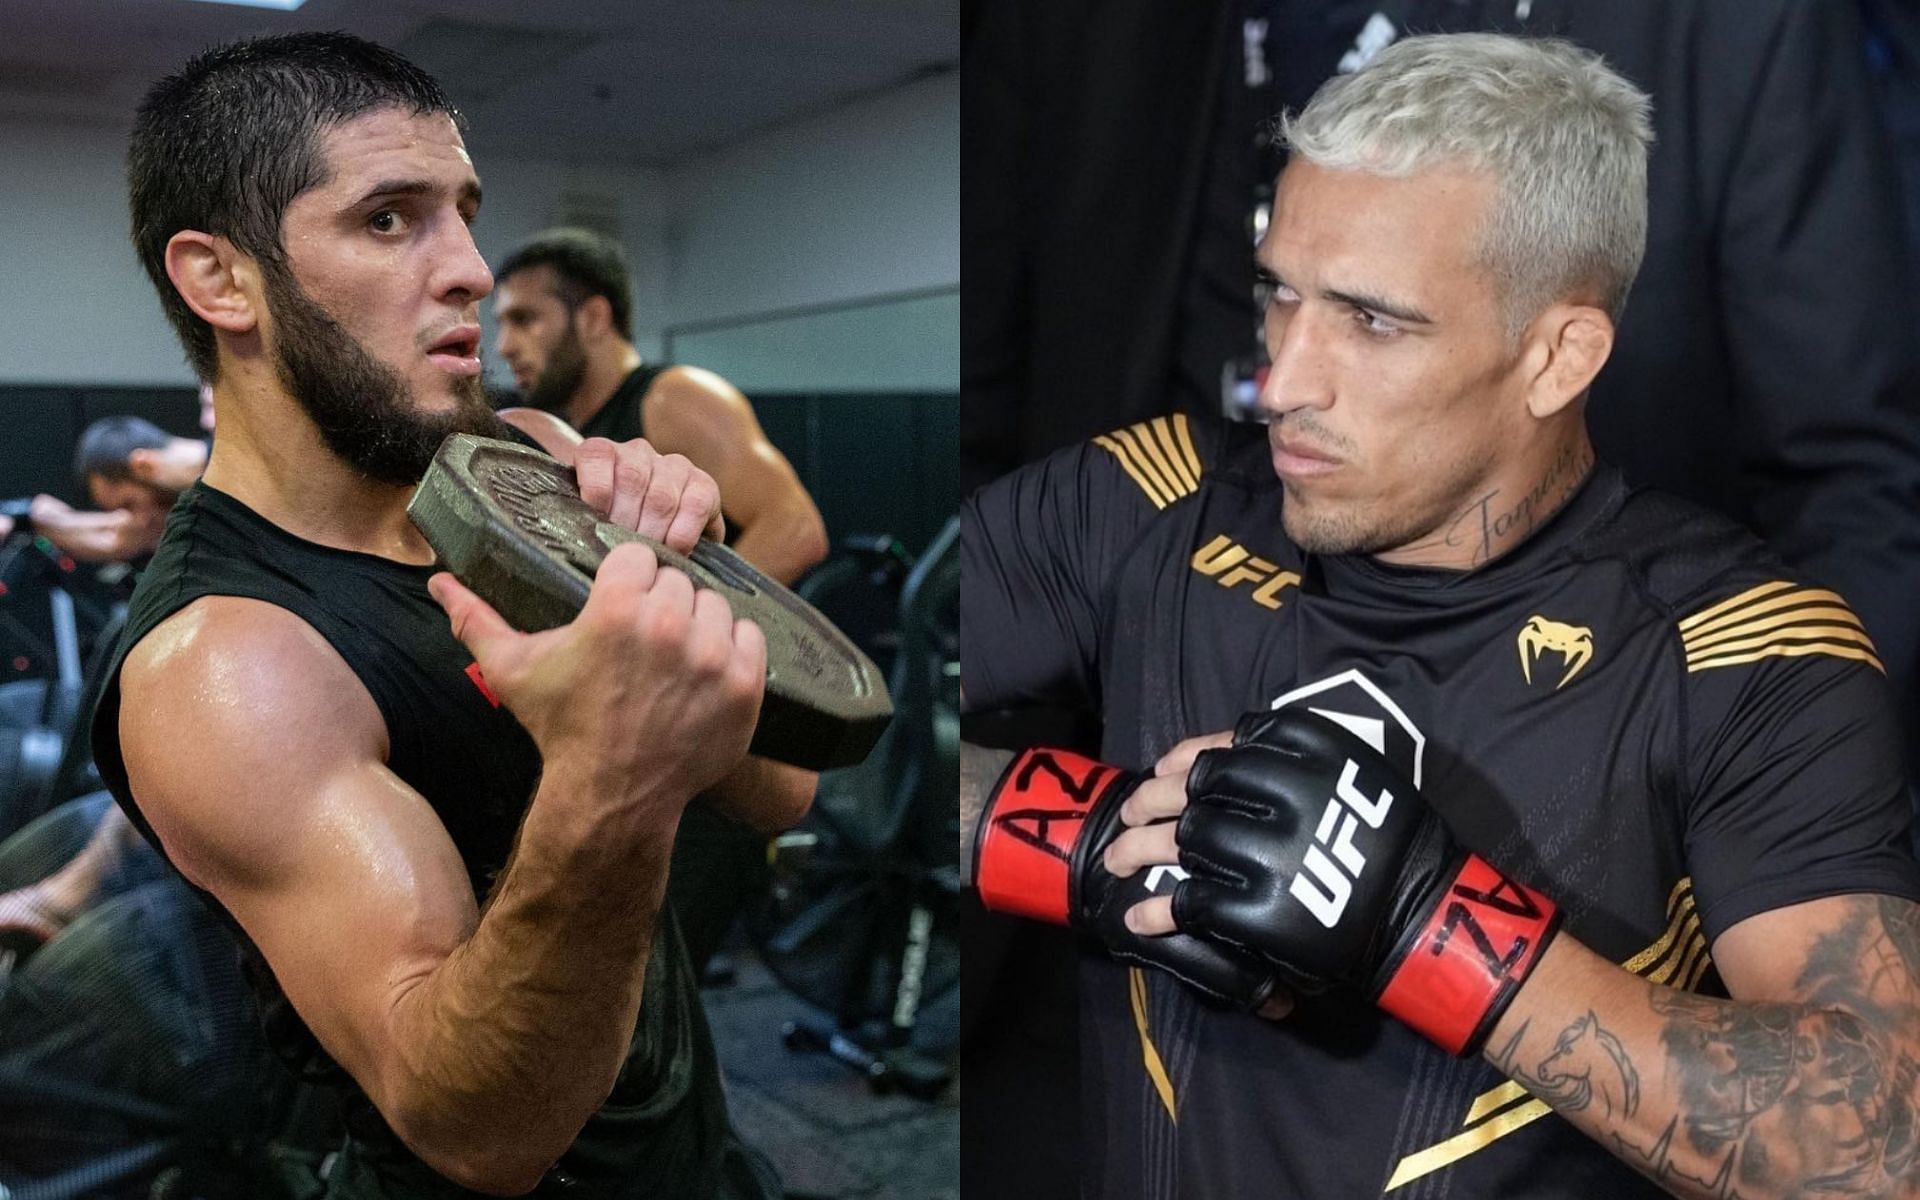 Islam Makhachev (L) and Charles Oliveira (R) [Images courtesy of @islam_makhachev and @charlesdobronxs Instagram]